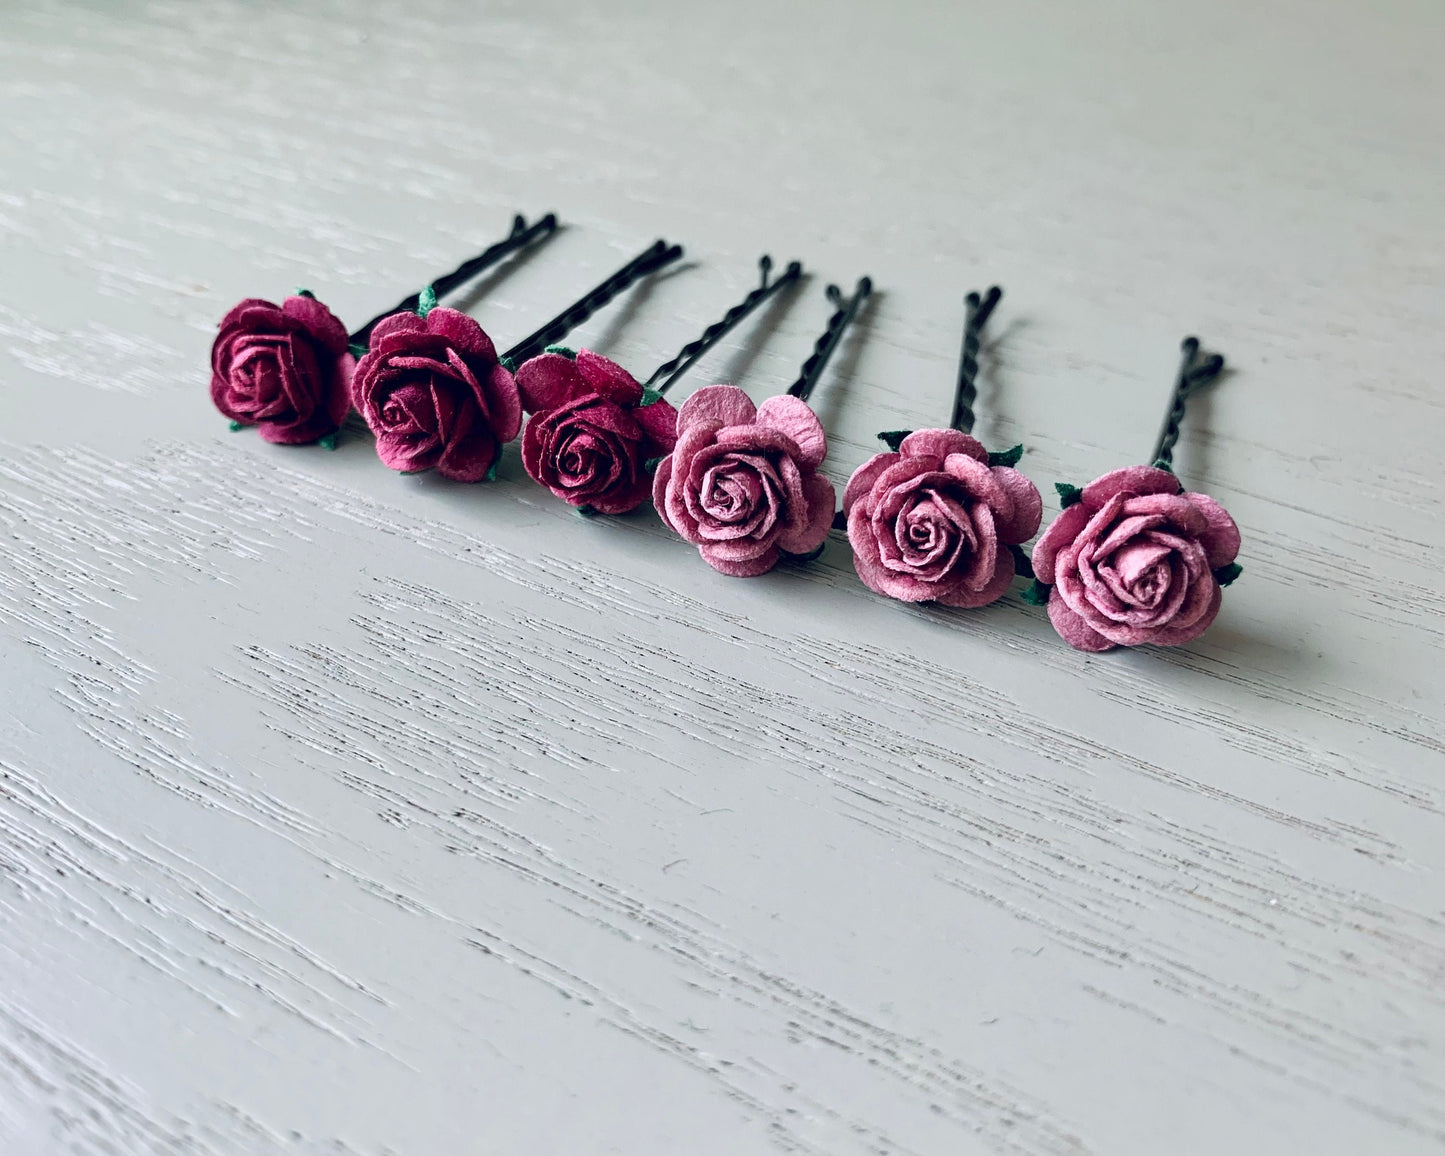 Rose Hair Pins in Wine Purple and Soft Lilac,  Paper Flower Bobby Pins, Merlot Wedding Rustic Hair Pins, 6 Floral Autumn Fall Hair Flowers MPR6